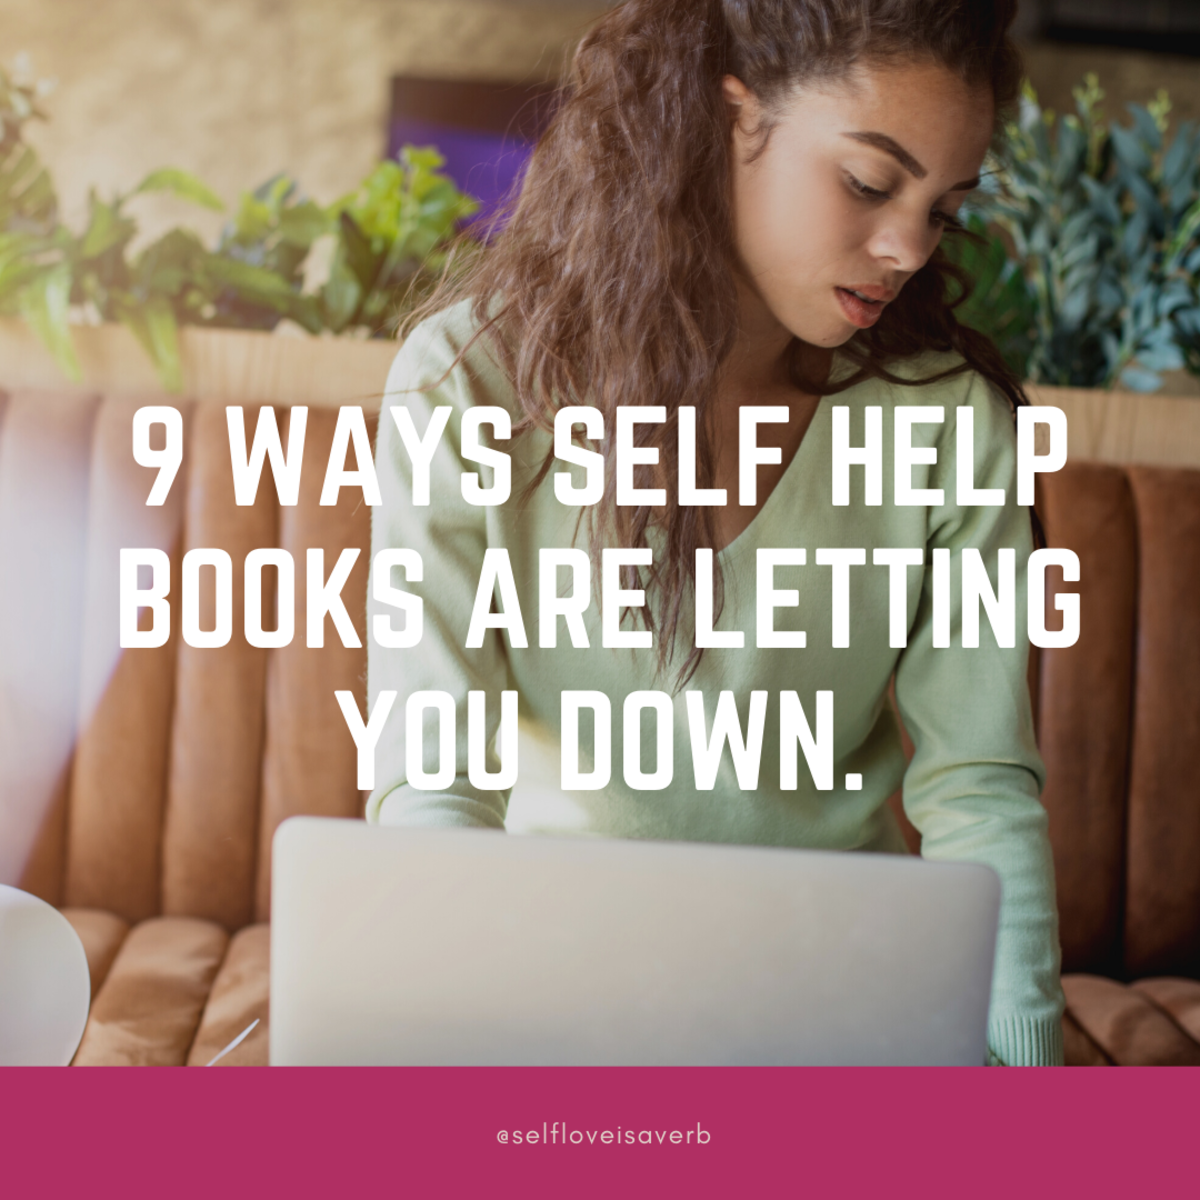 9-ways-self-help-books-are-letting-you-down